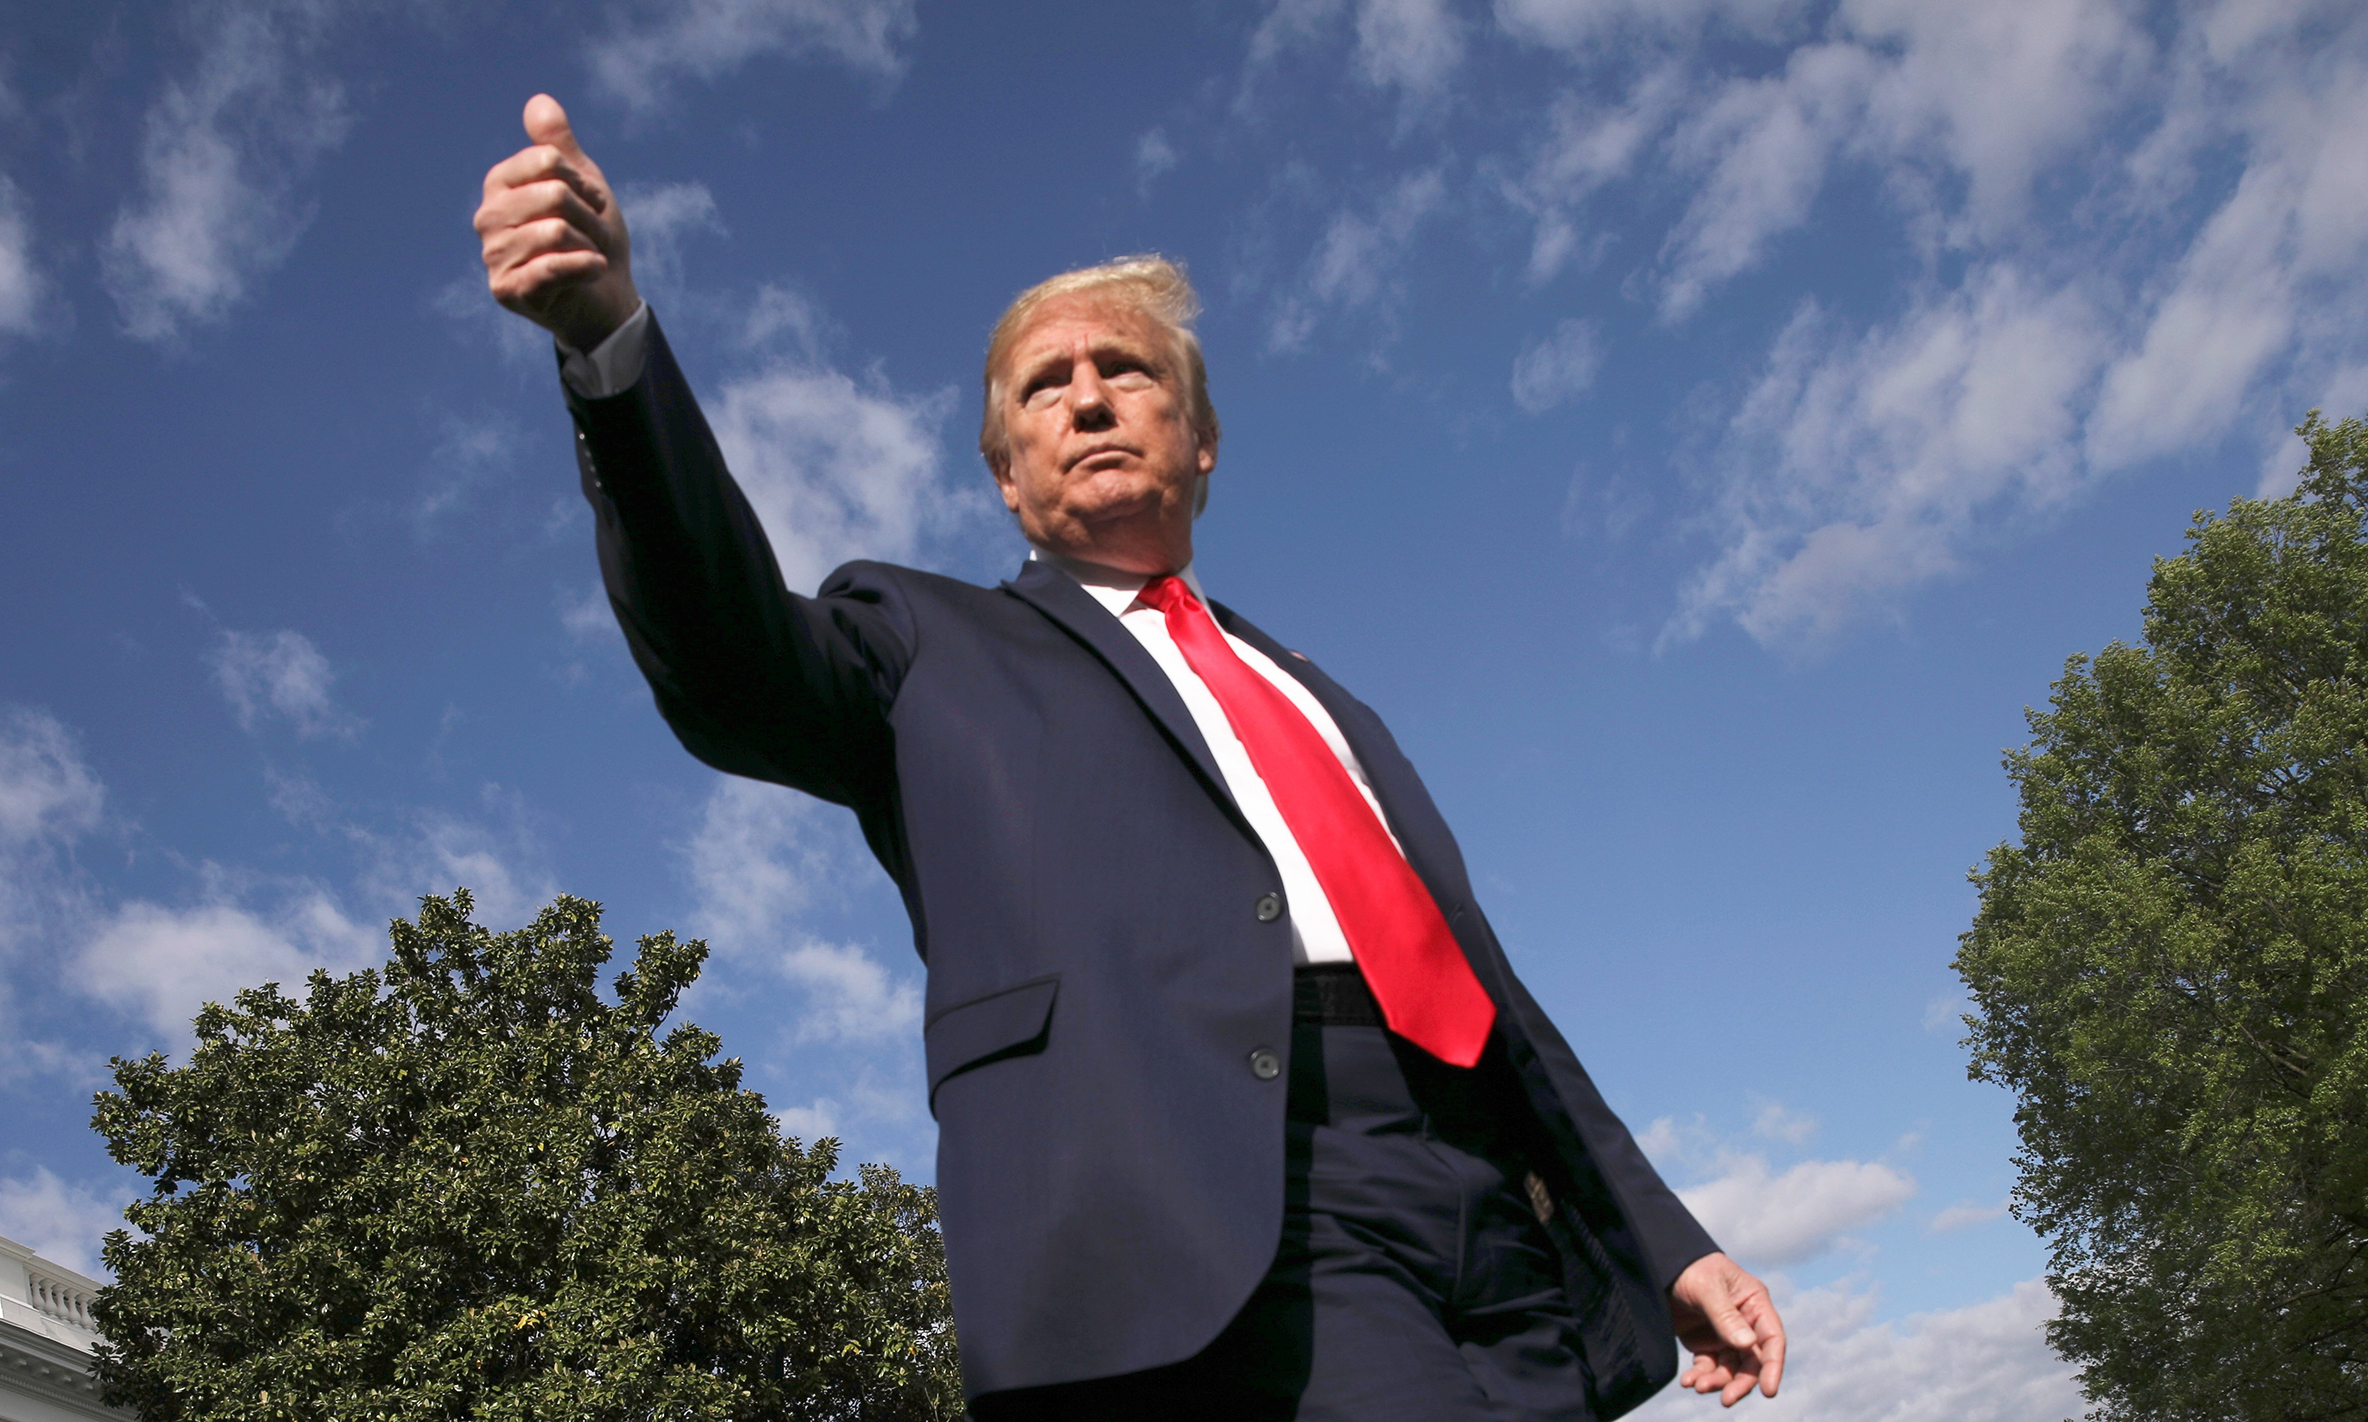 U.S. President Donald Trump give a thumbs up to reporters and cameras as he heads to the Marine One helicopter to depart for a weekend at Camp David from the South Lawn of the White House in Washington, U.S., May 1, 2020. REUTERS/Carlos Barria